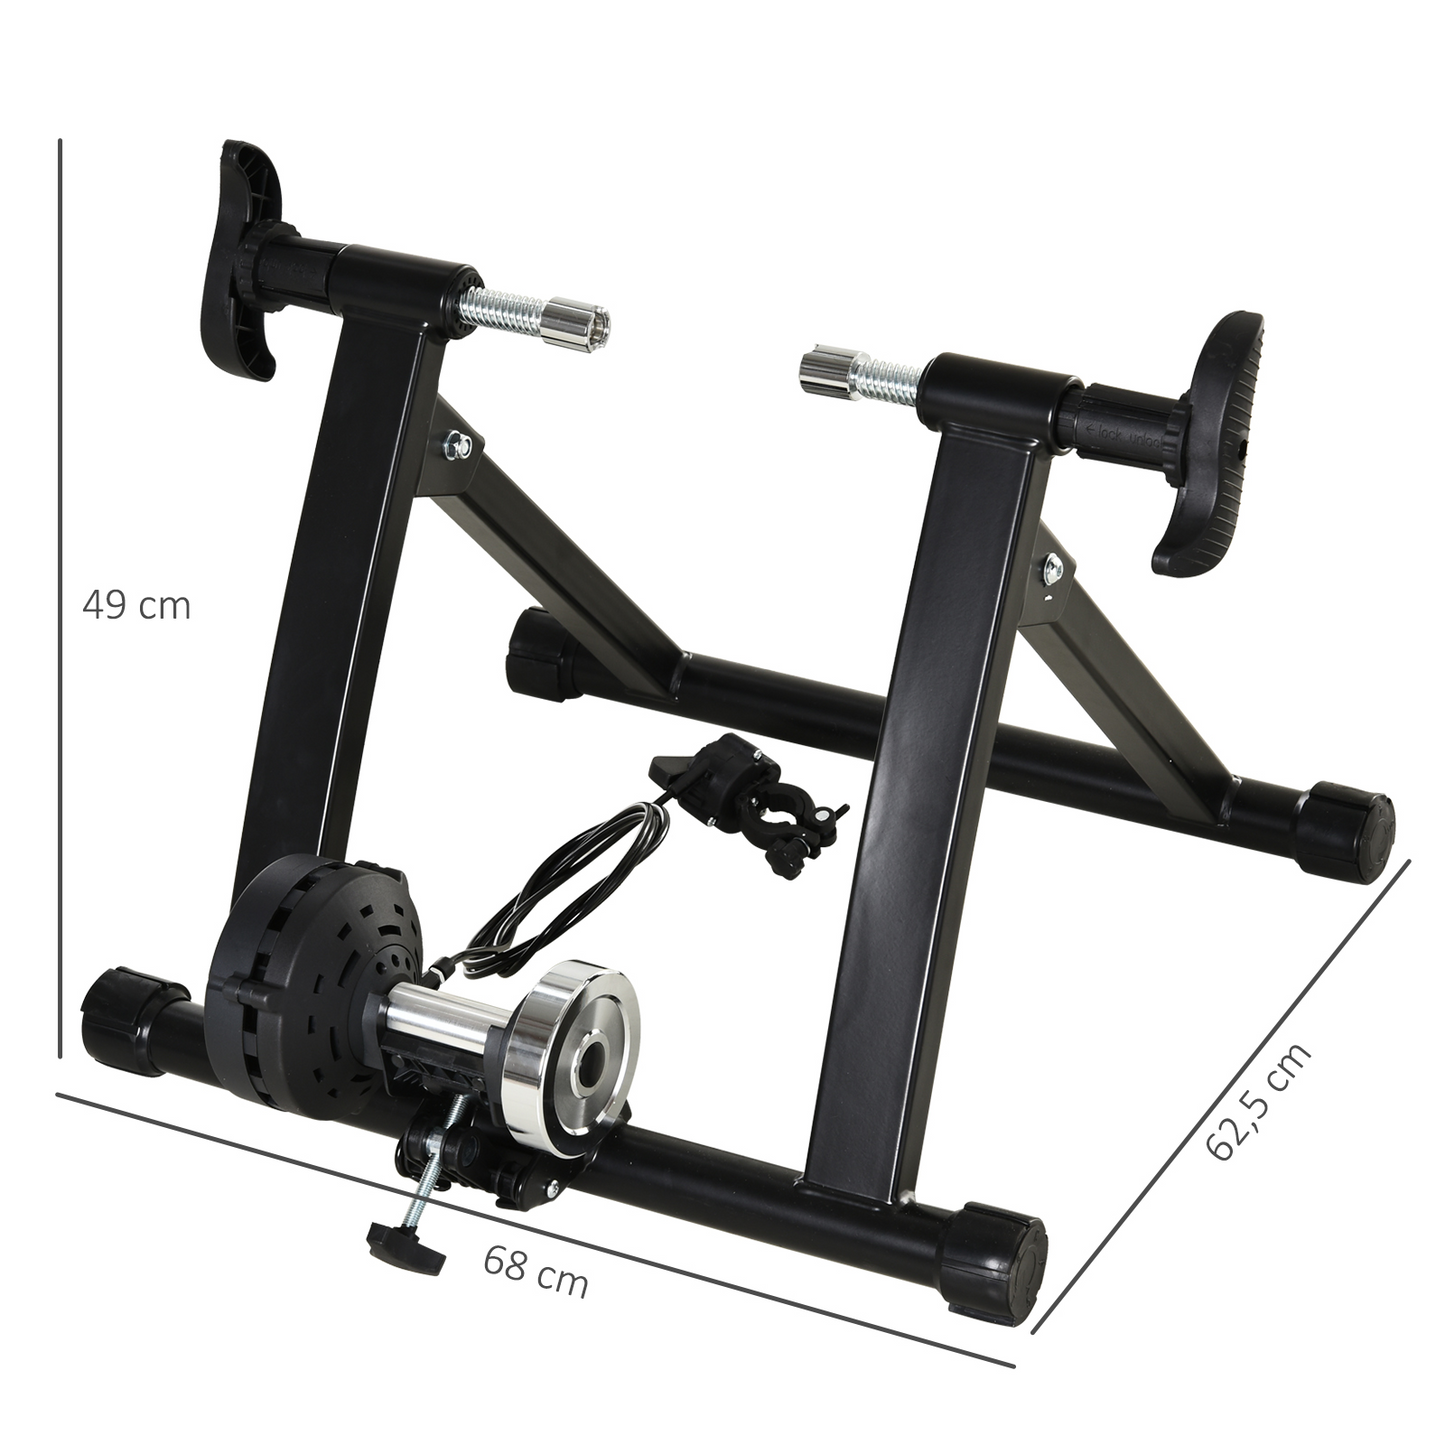 HOMCOM Foldable Indoor Bike Trainer Stationary Workout Stand, Suitable for 26"-28" or 650C, 700C Bike Tyres